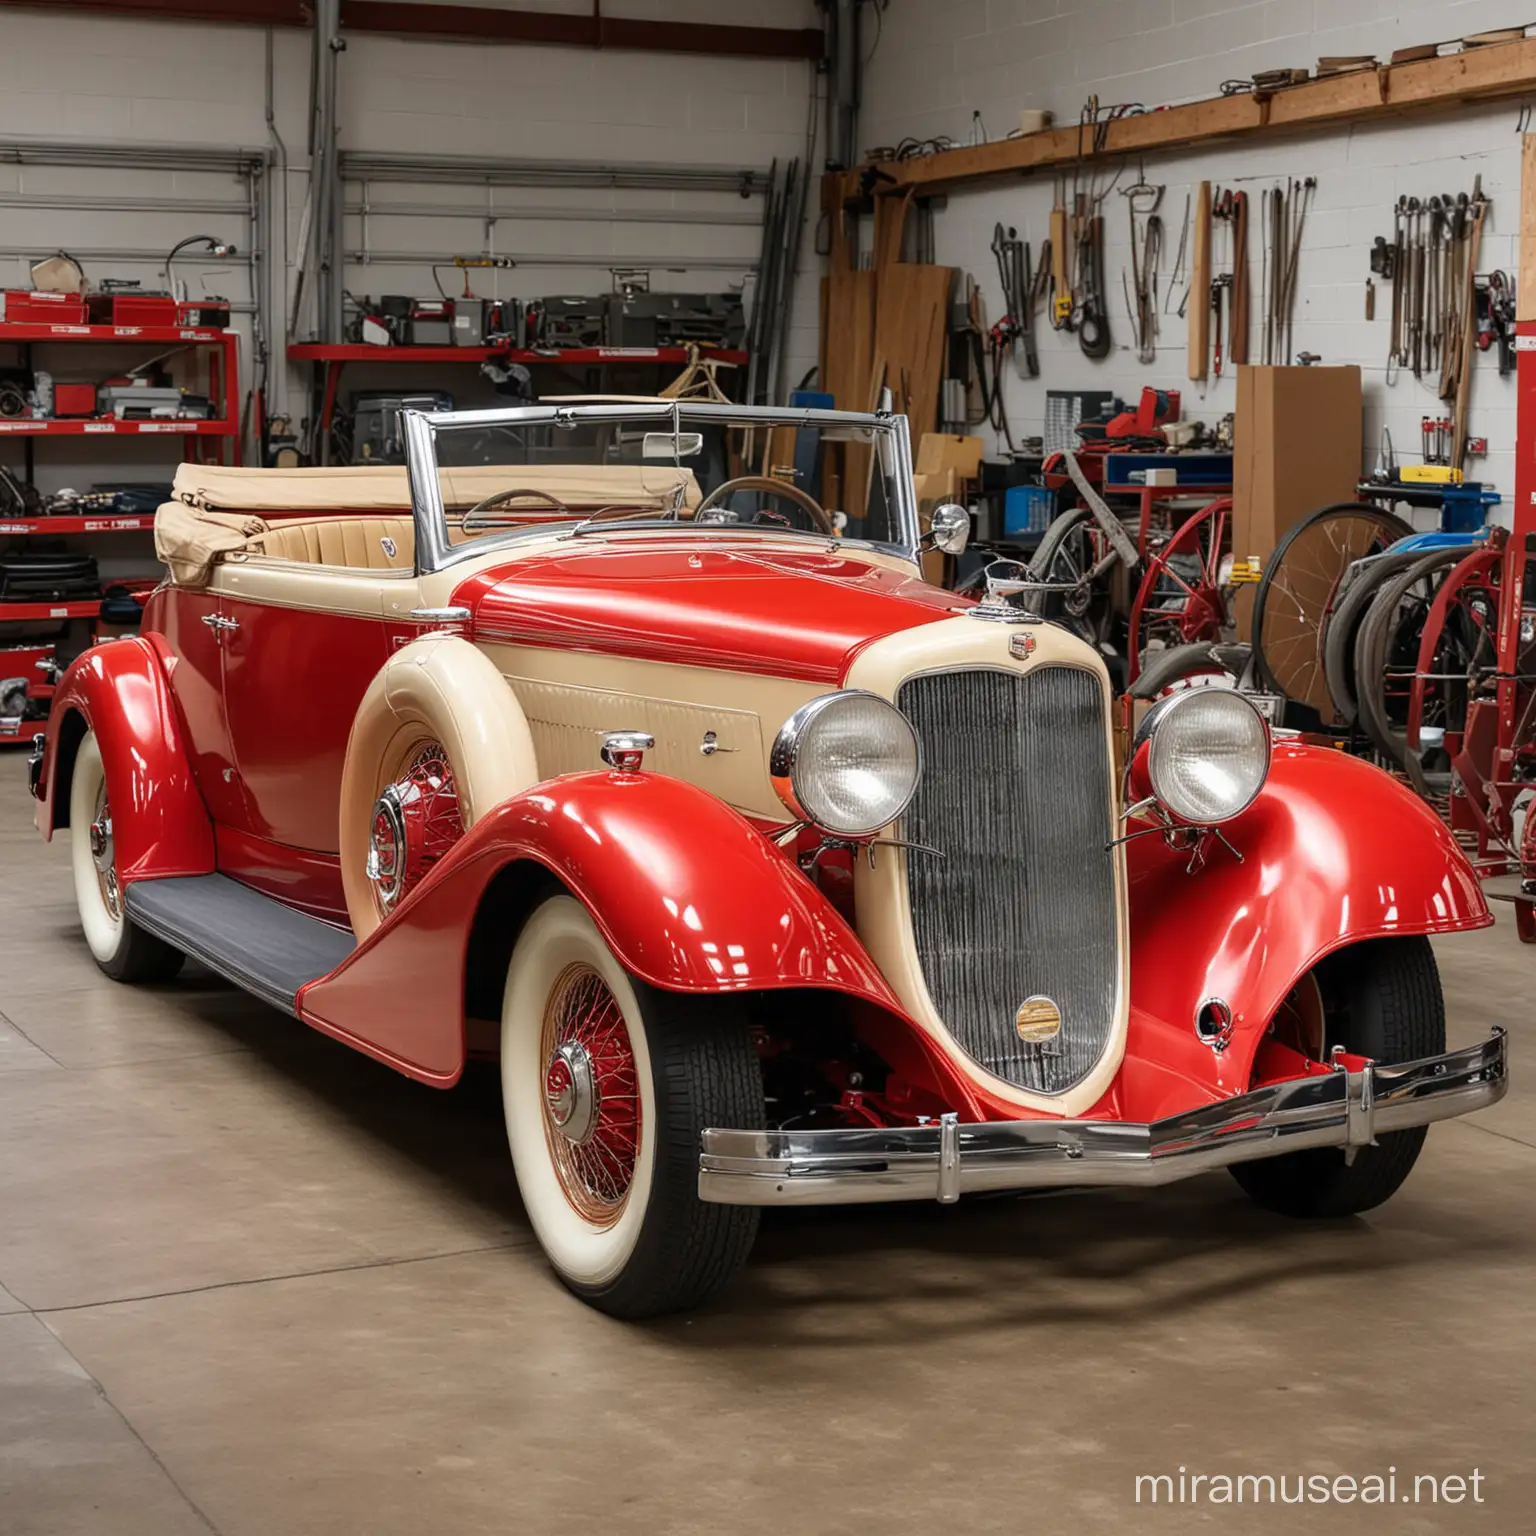 1934 Cadillac 355D convertible, red and cream, in a garage workshop.